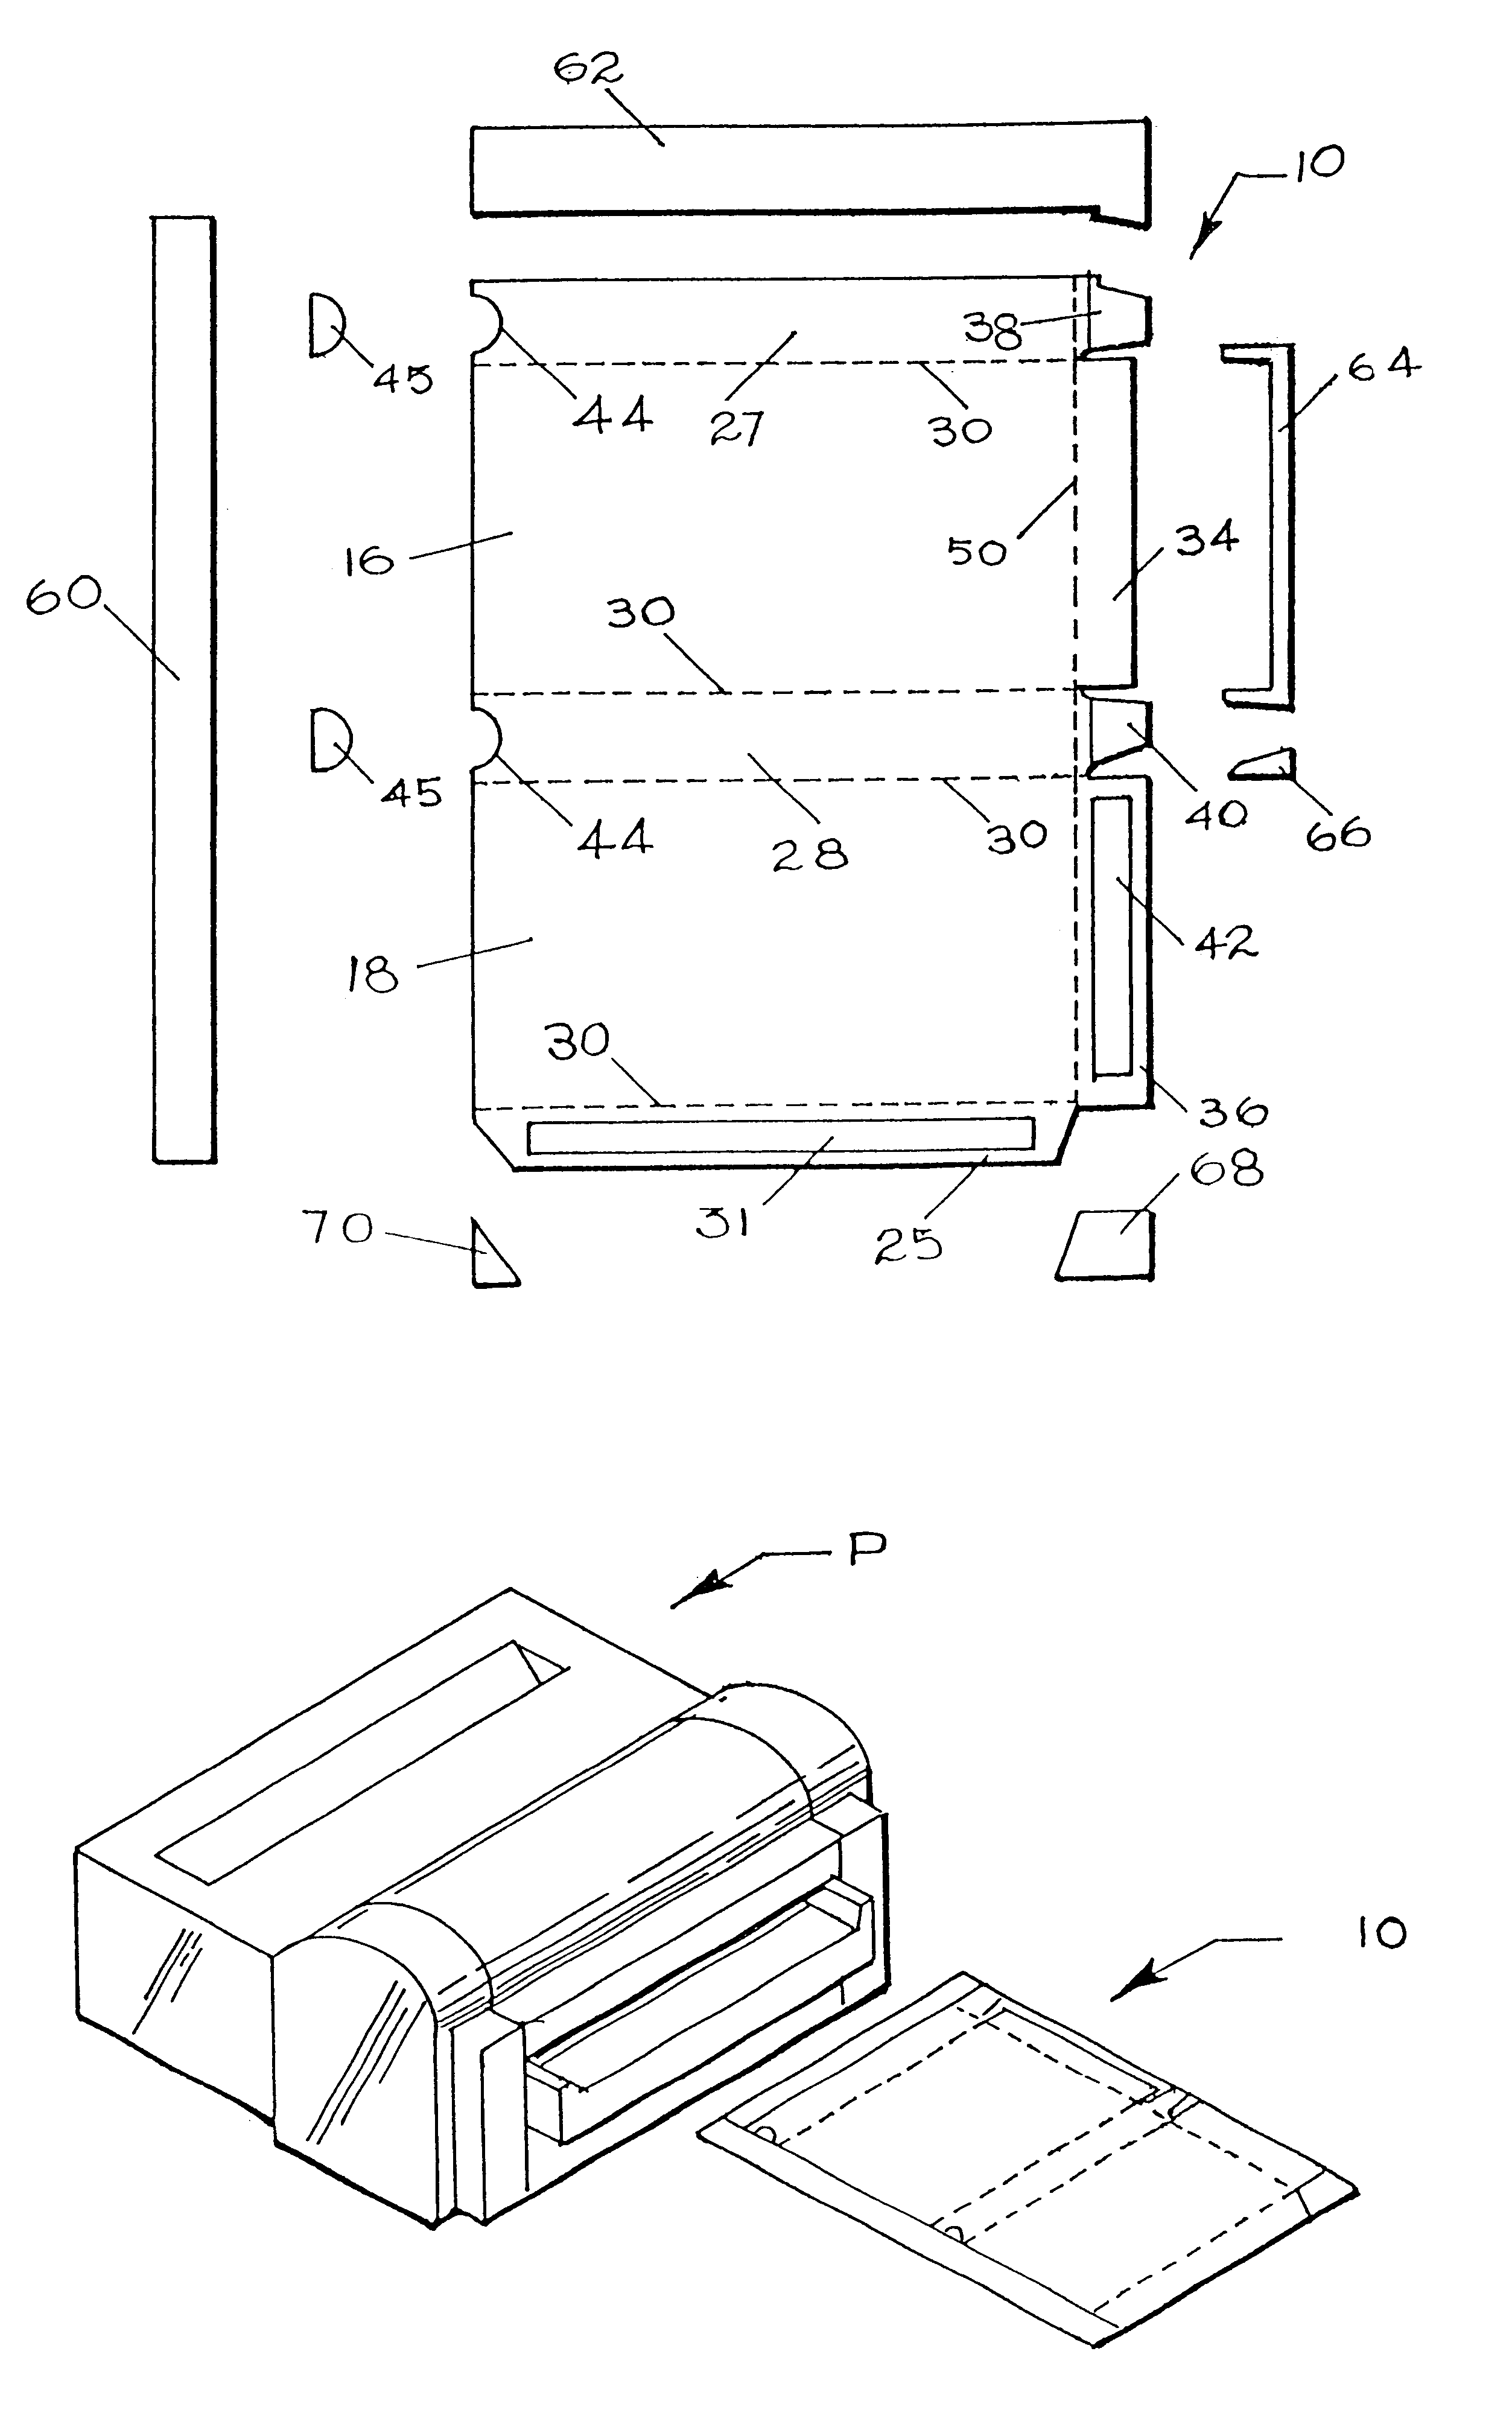 Printable blank for forming video cassette boxes